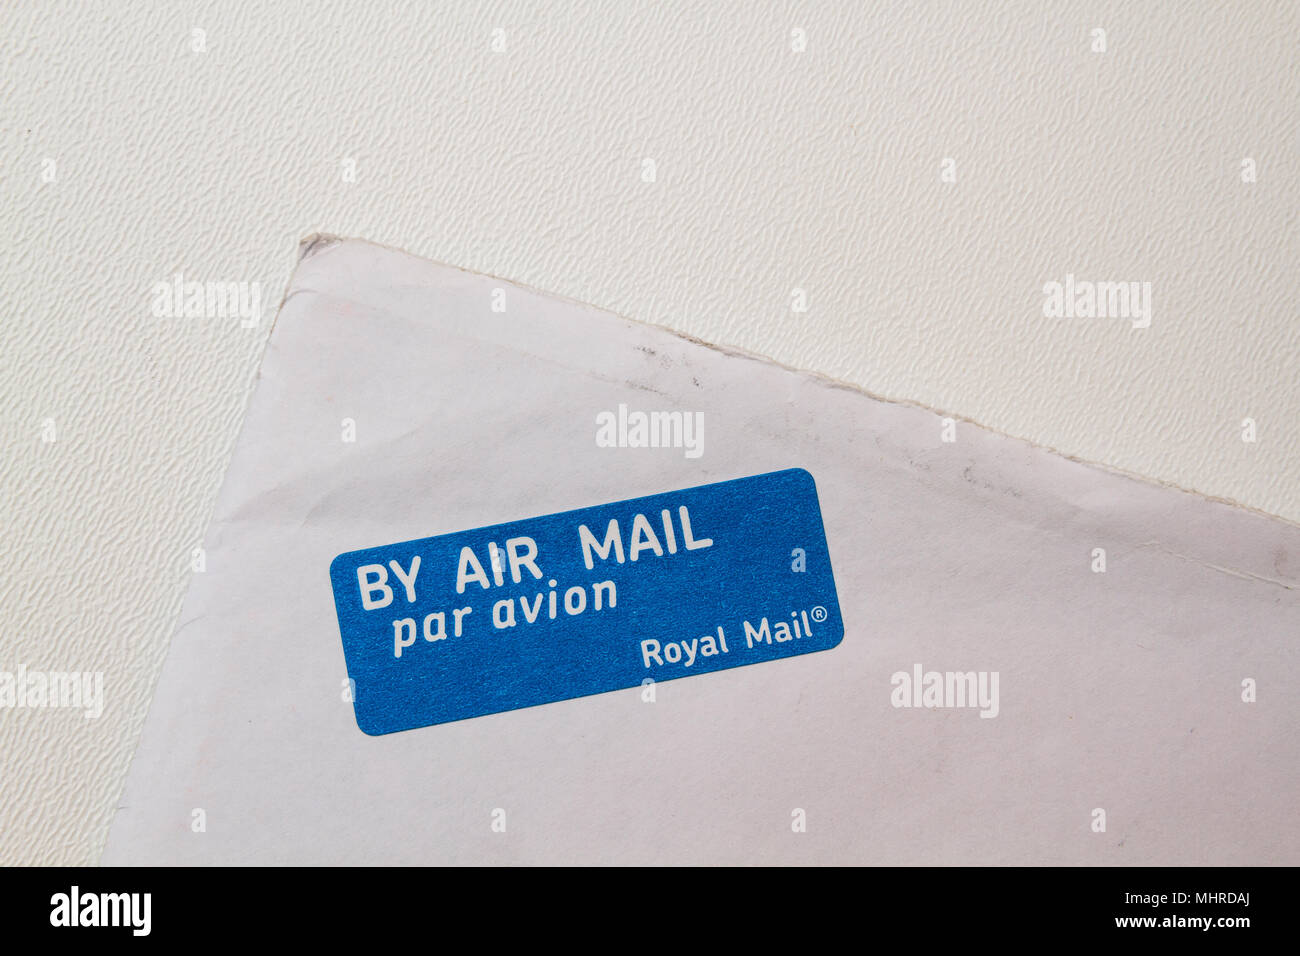 White envelope corner. By air mail par avion by Royal Mail. By plane blue with white stamp, on the corner of an envelope, isolated on white. Stock Photo